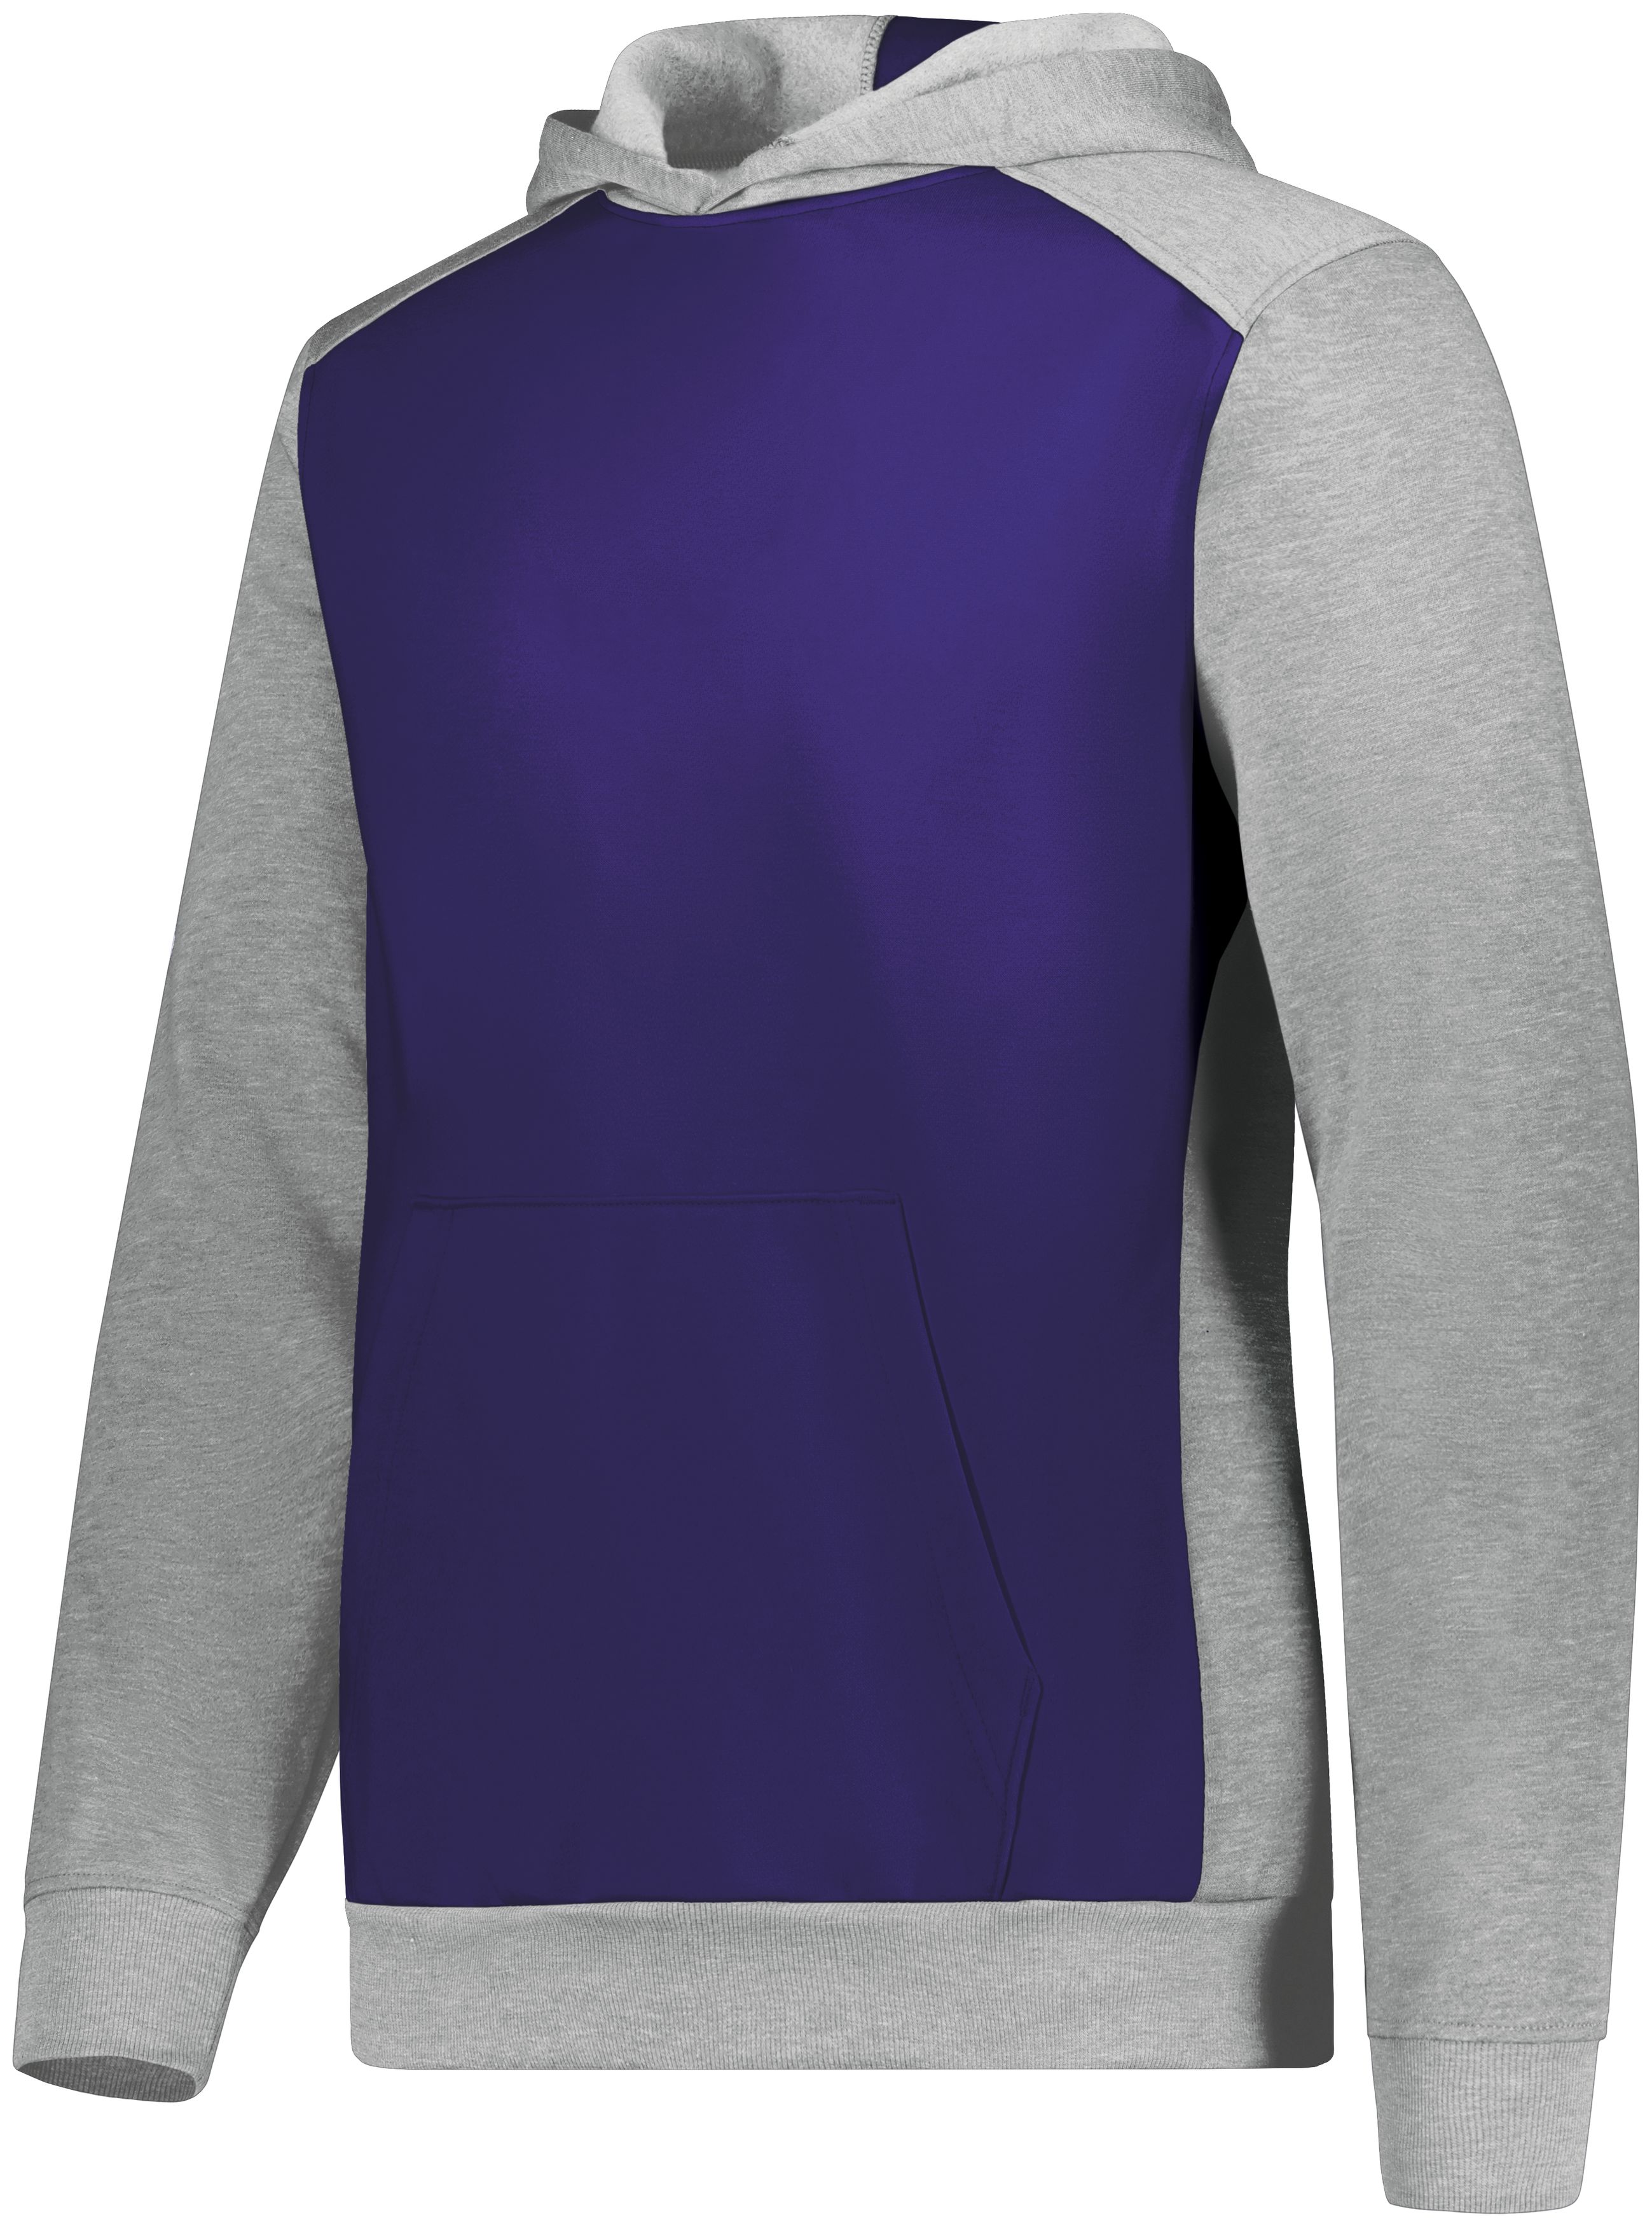 click to view Purple/Grey Heather